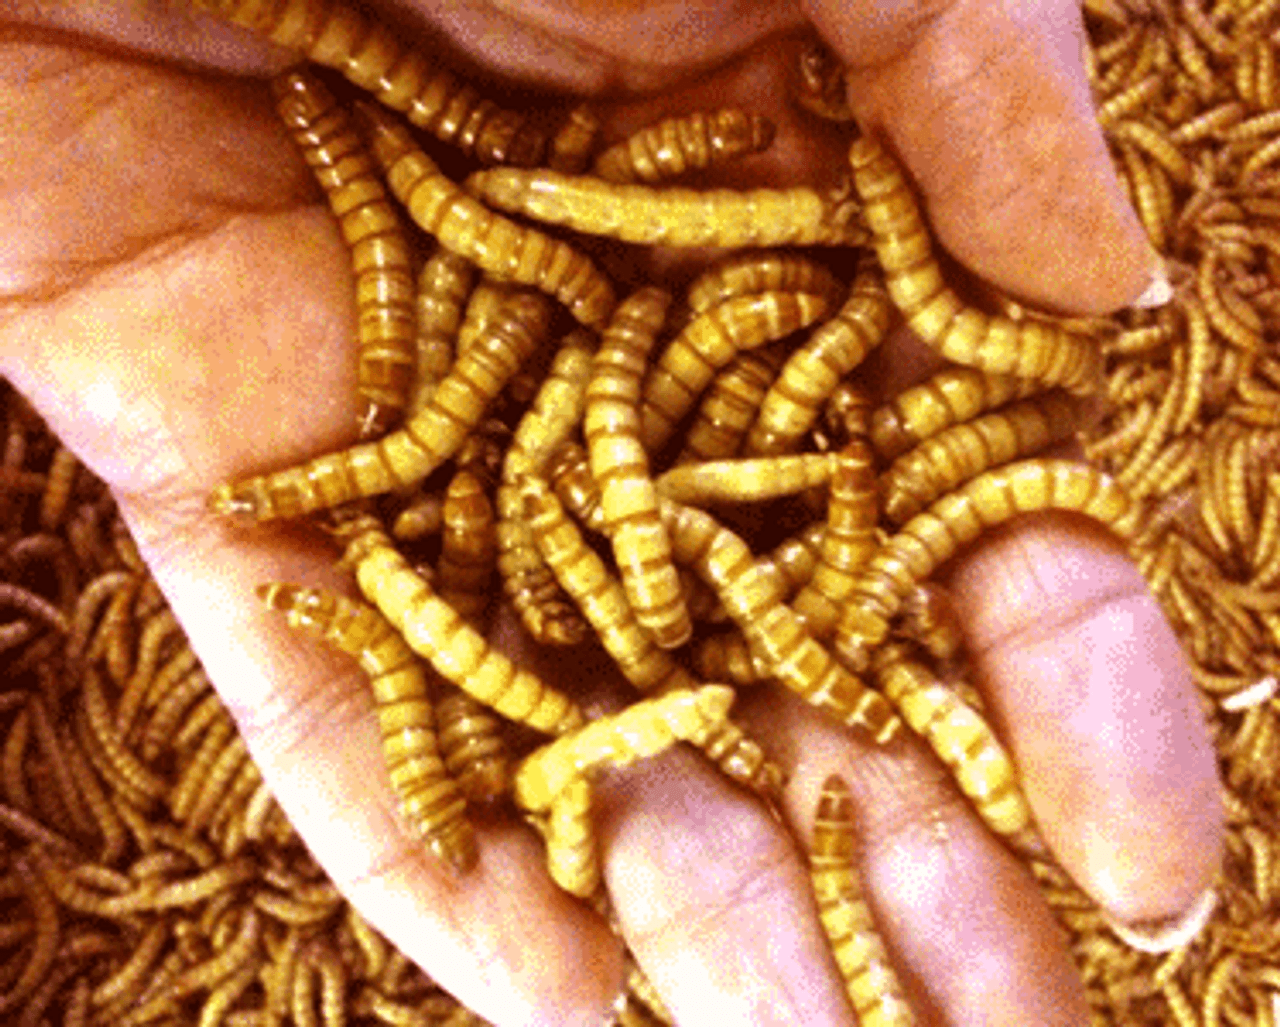 Giant mealworms in the palm of a hand for size reference